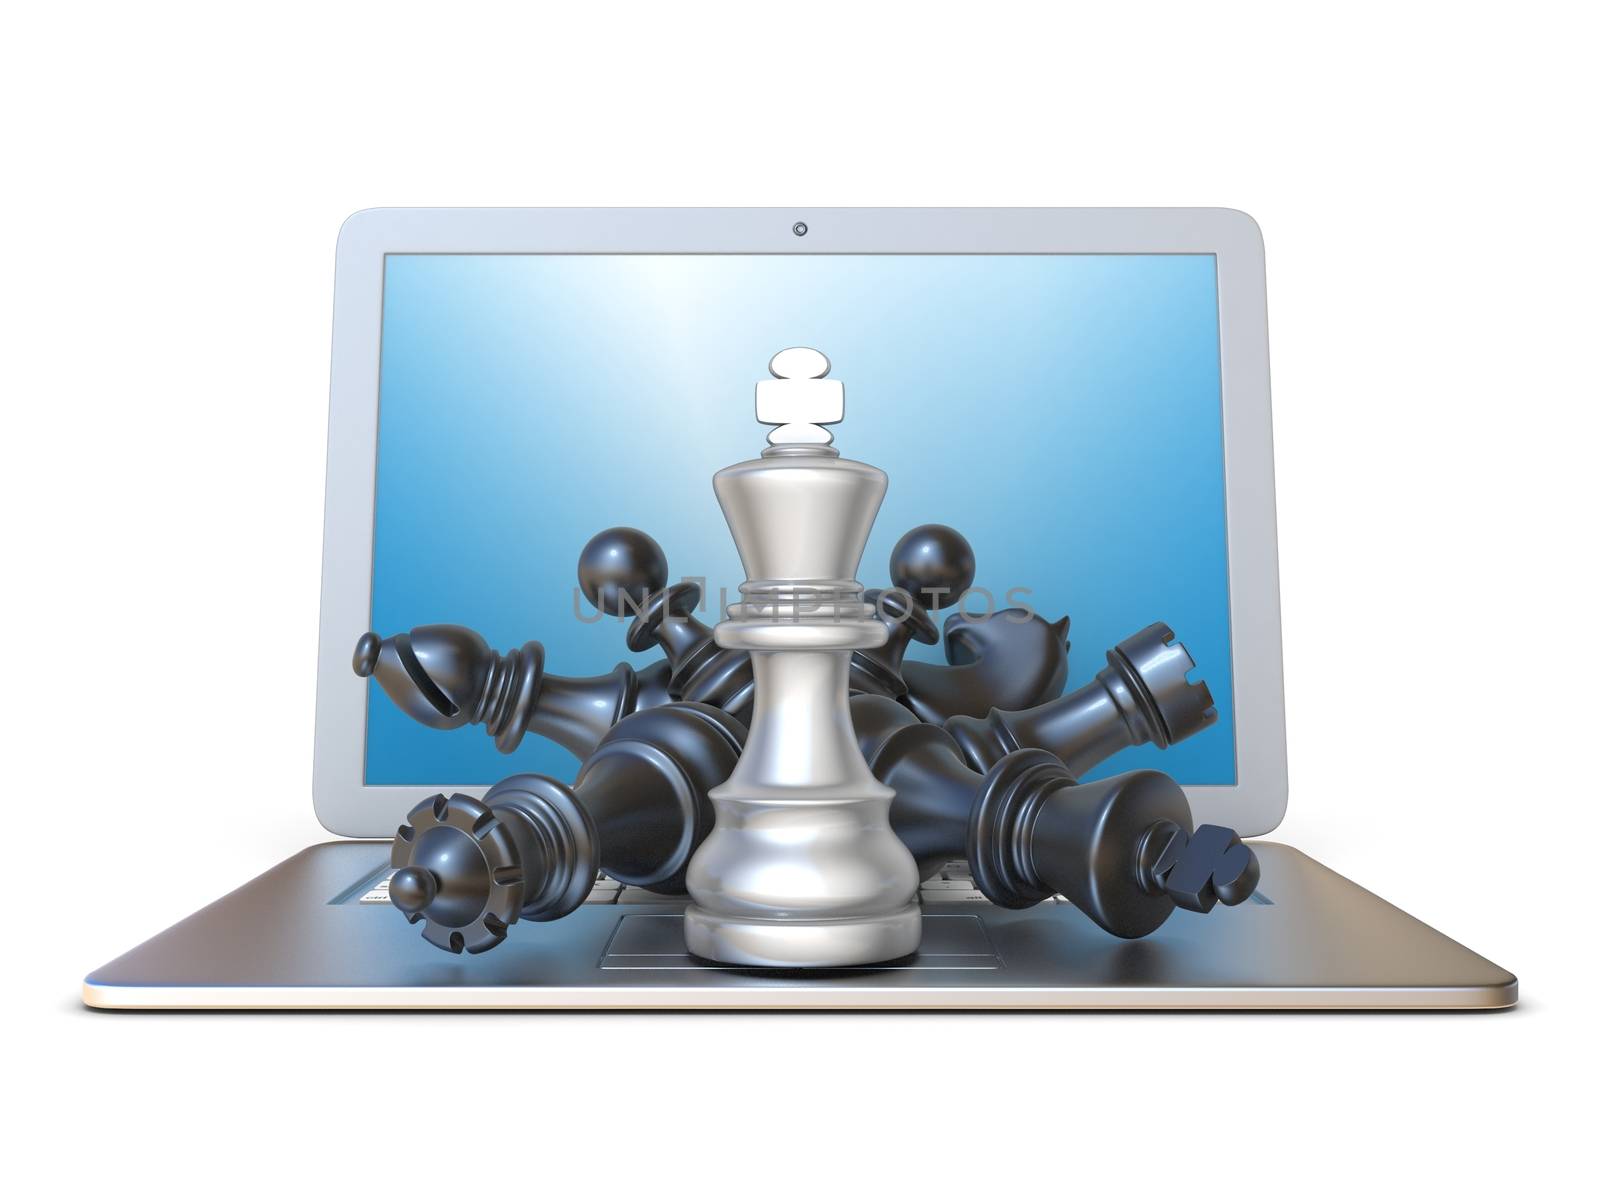 Chess pieces on open laptop front view 3D render illustration isolated on white background